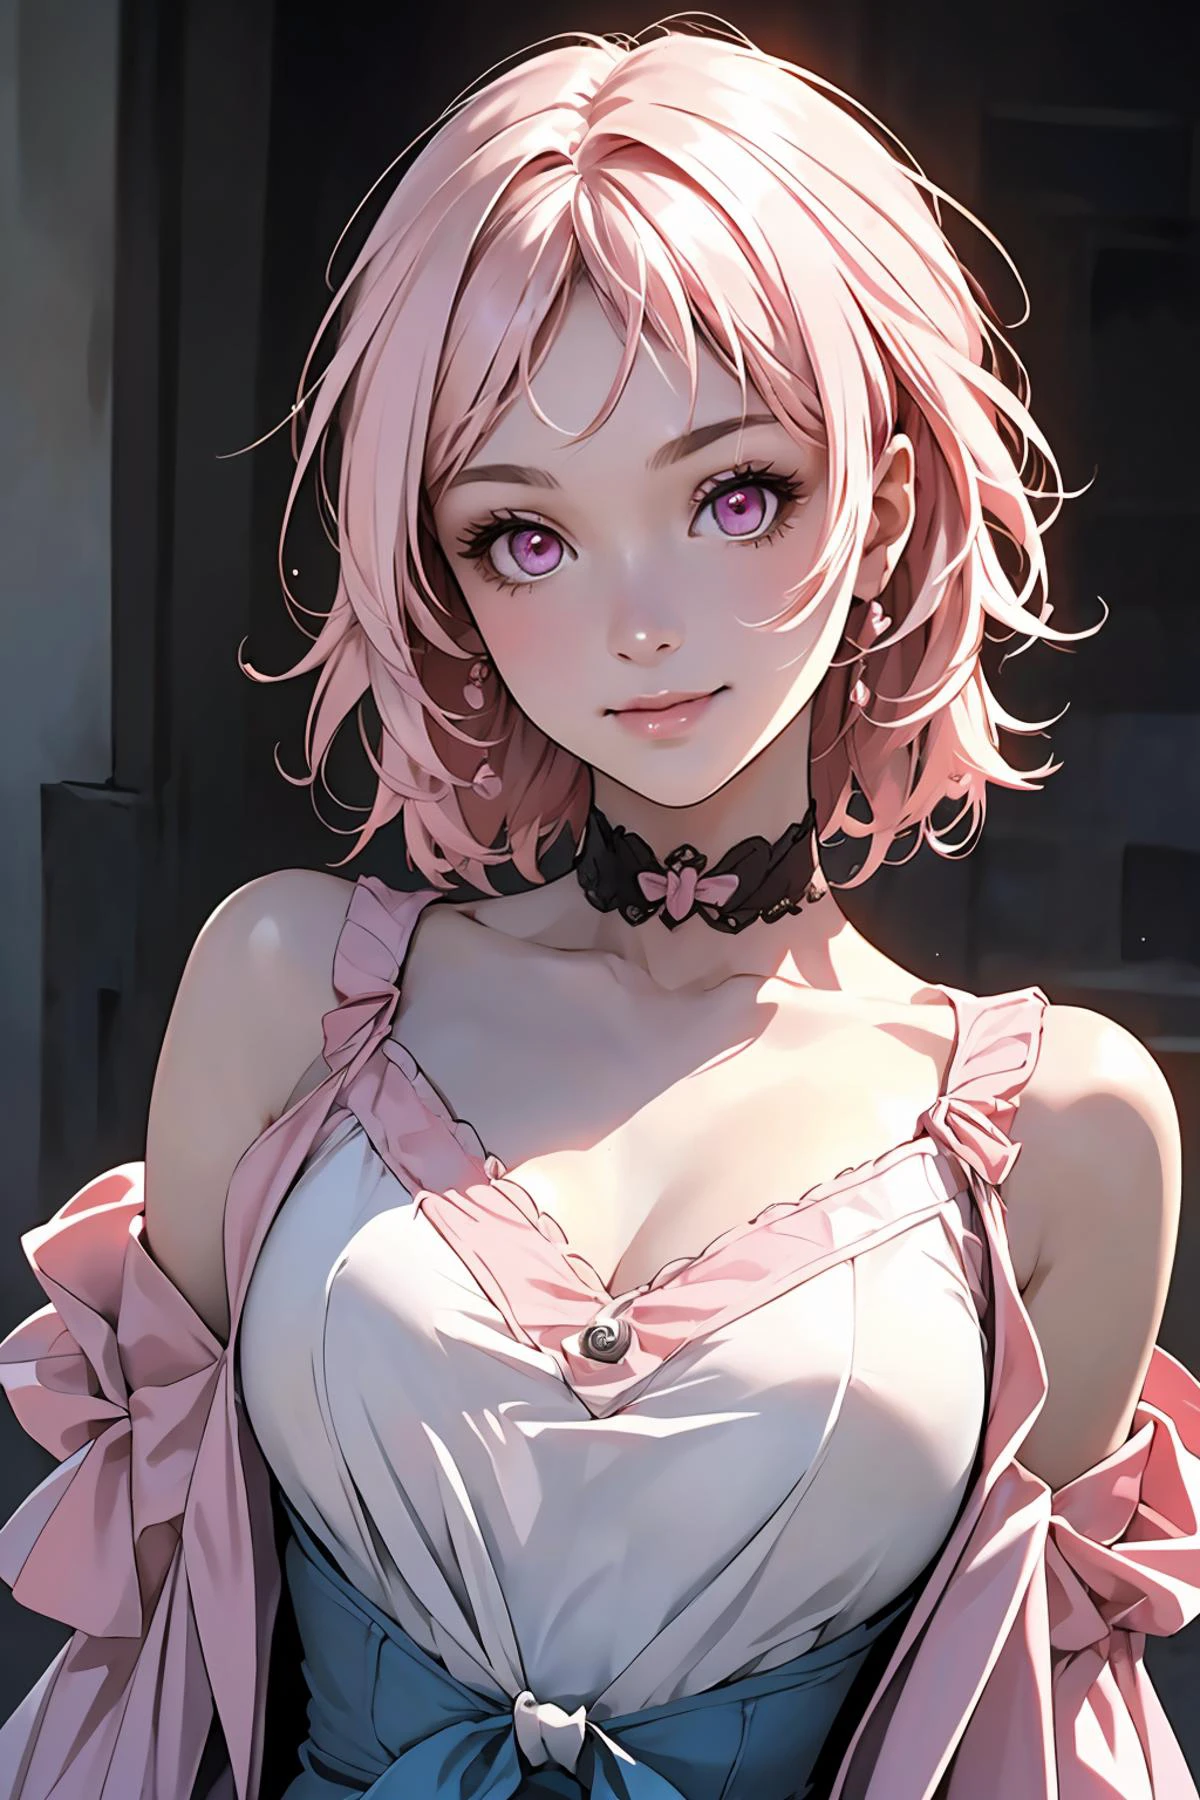 8k high quality detailed,highres,anime,comic,detailed image,
(an illustration of a teenage girl posing,(an illustration of girl,teenage girl)),(magazine_illustration),
(,march7th,1girl,pink eyes,pink hair,medium_hair,medium_breasts),(Dazzling Smile),detailed_face,
((double v):0.8),
((, MIS,frilled dress):0.85),(,realistic clothing texture,realistic_skin_texture),